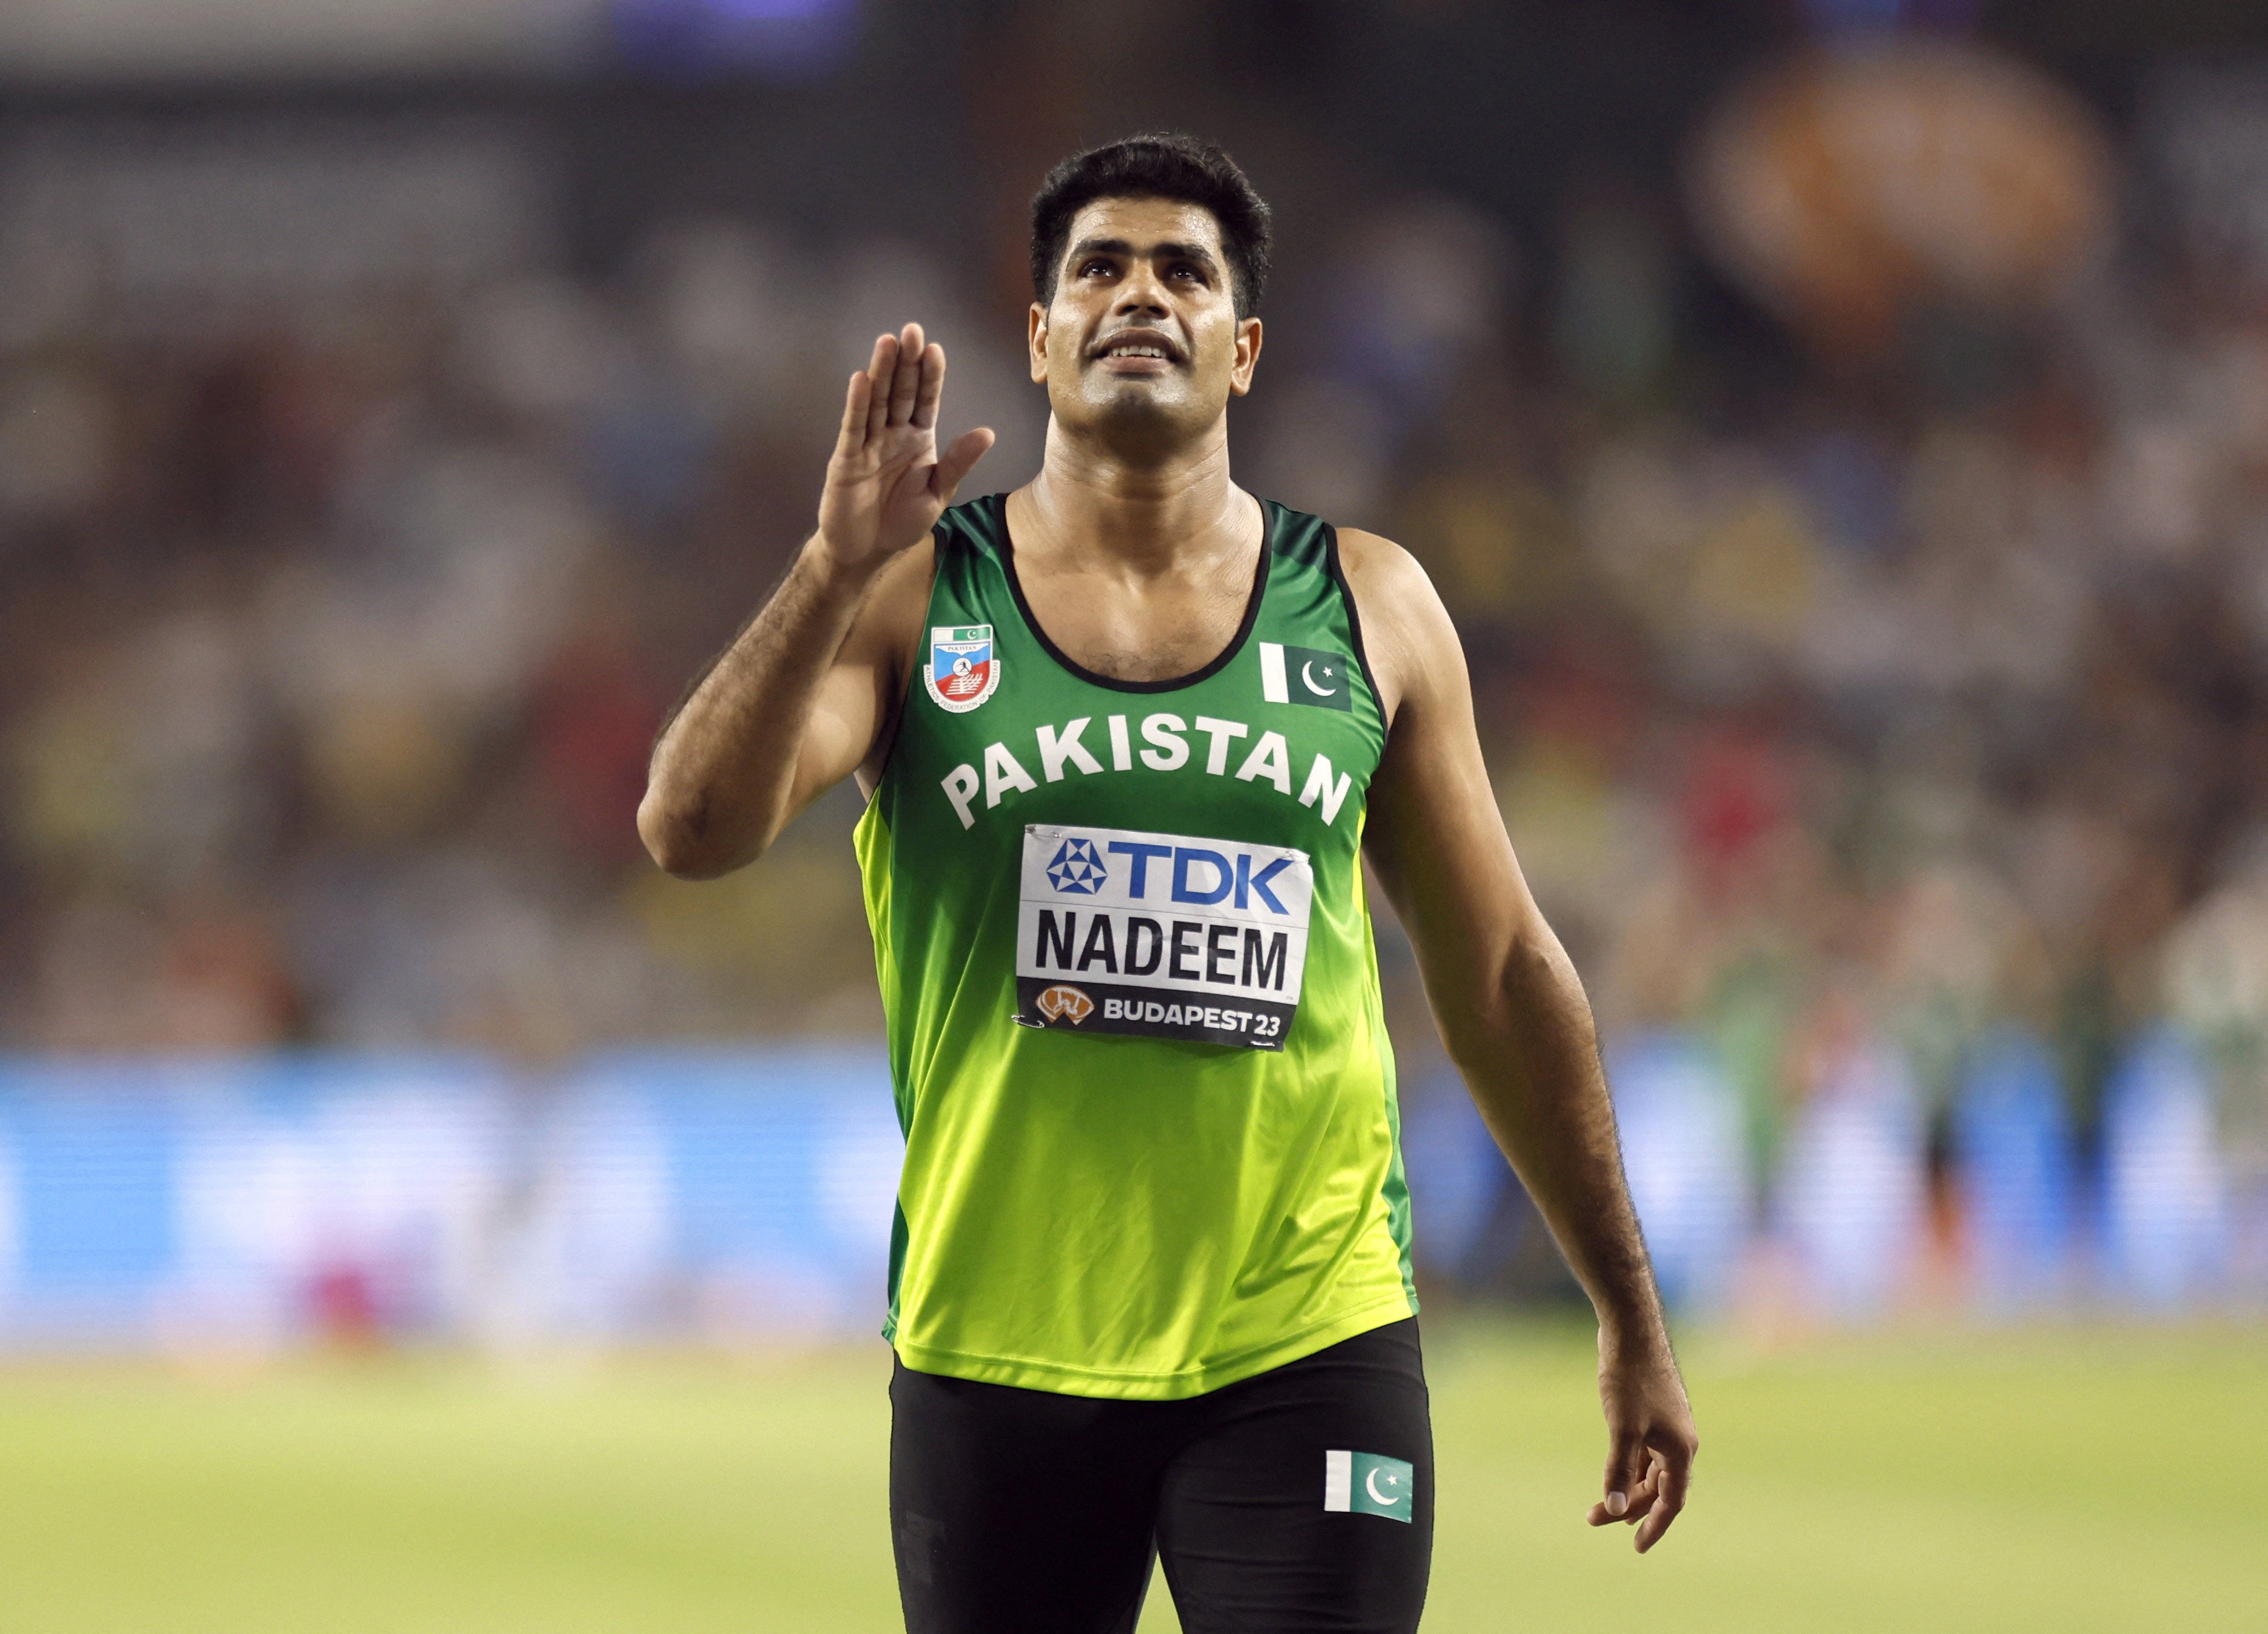 opt out pakistan s main medal hope at the asian games javelin thrower arshad nadeem ill not compete after resurgence of knee injury photo afp